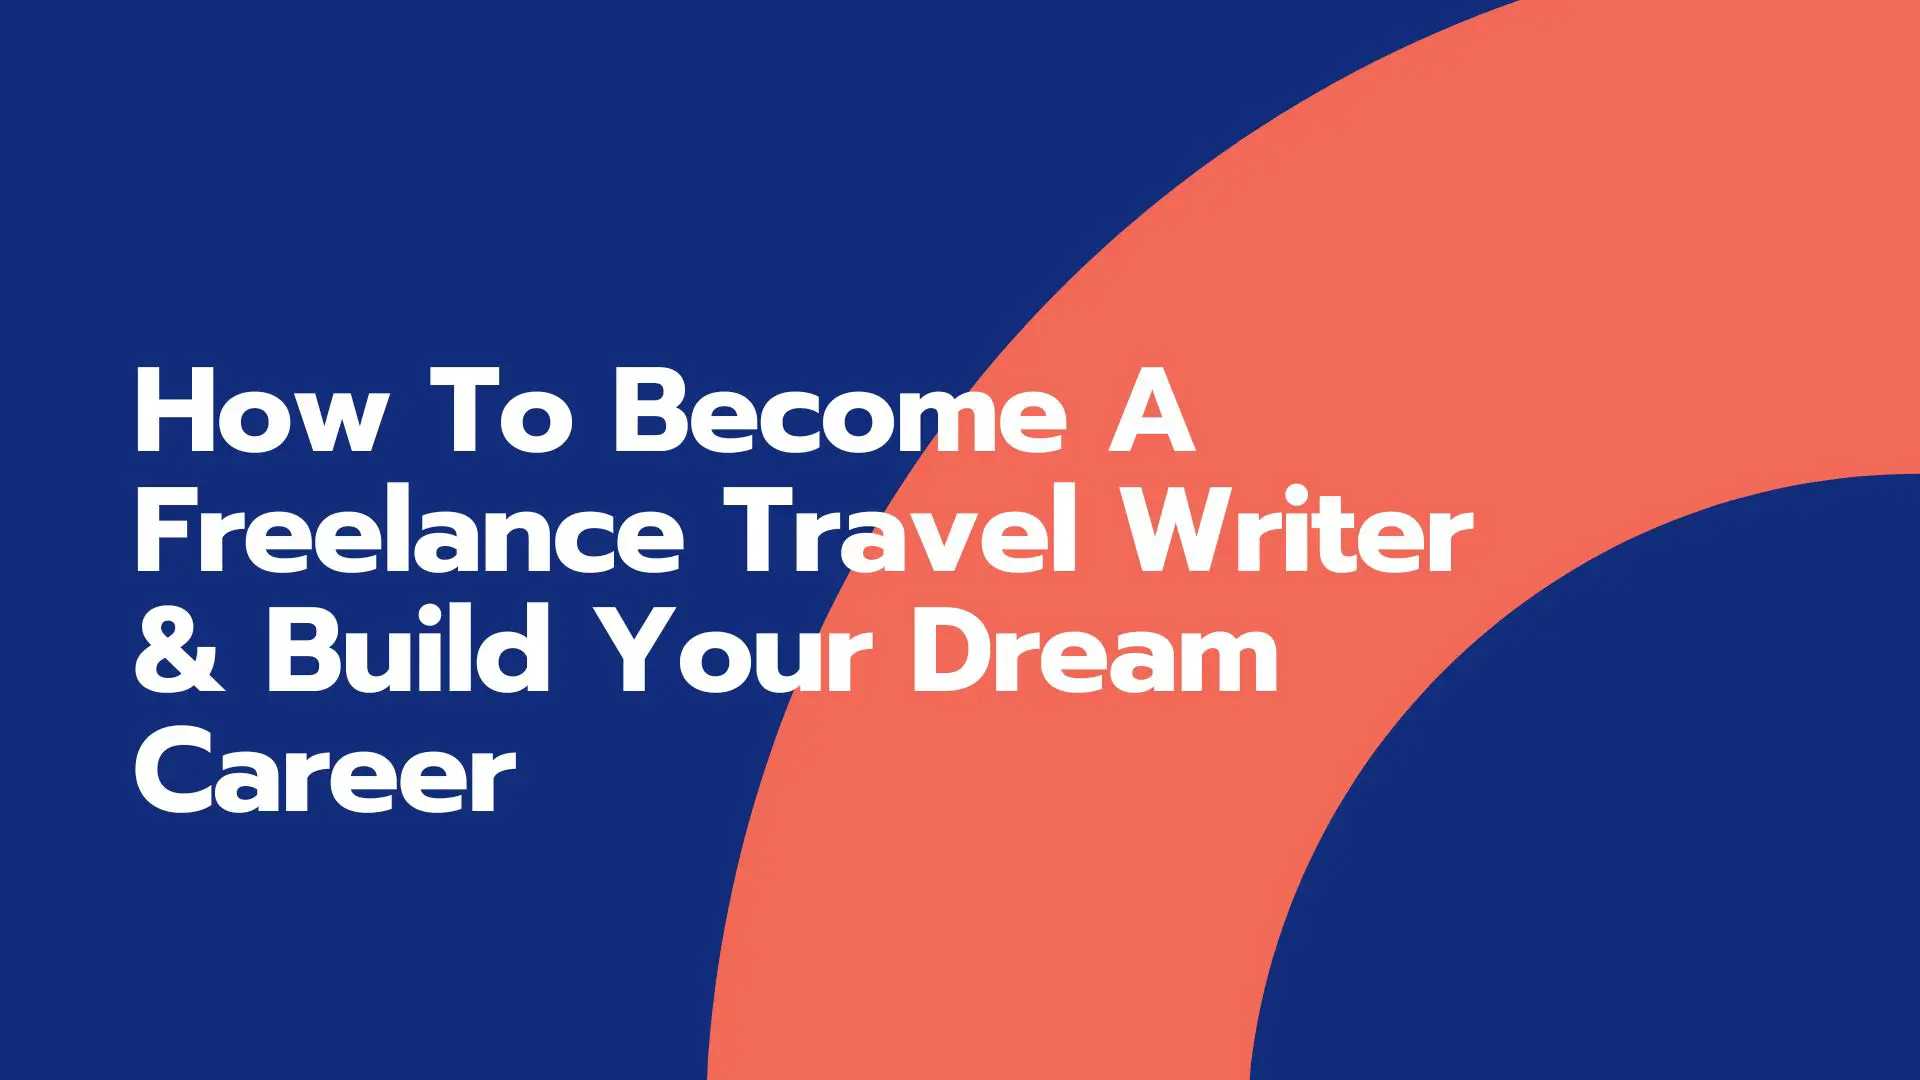 How To Become A Freelance Travel Writer & Build Your Dream Career